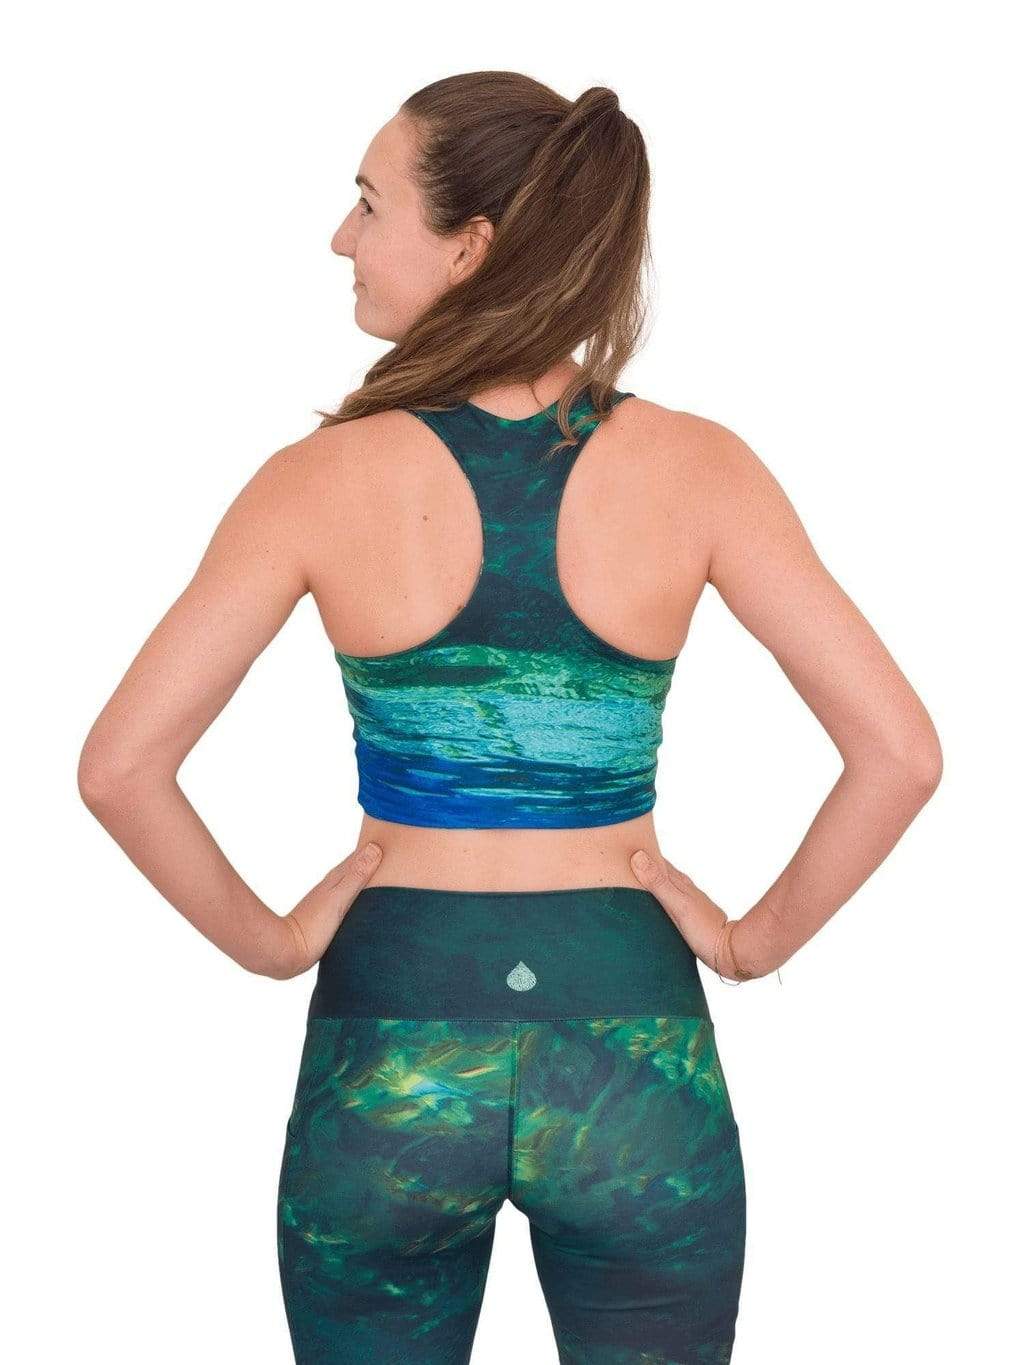 Fountain of Youth/Mermaid Camo Reversible Top